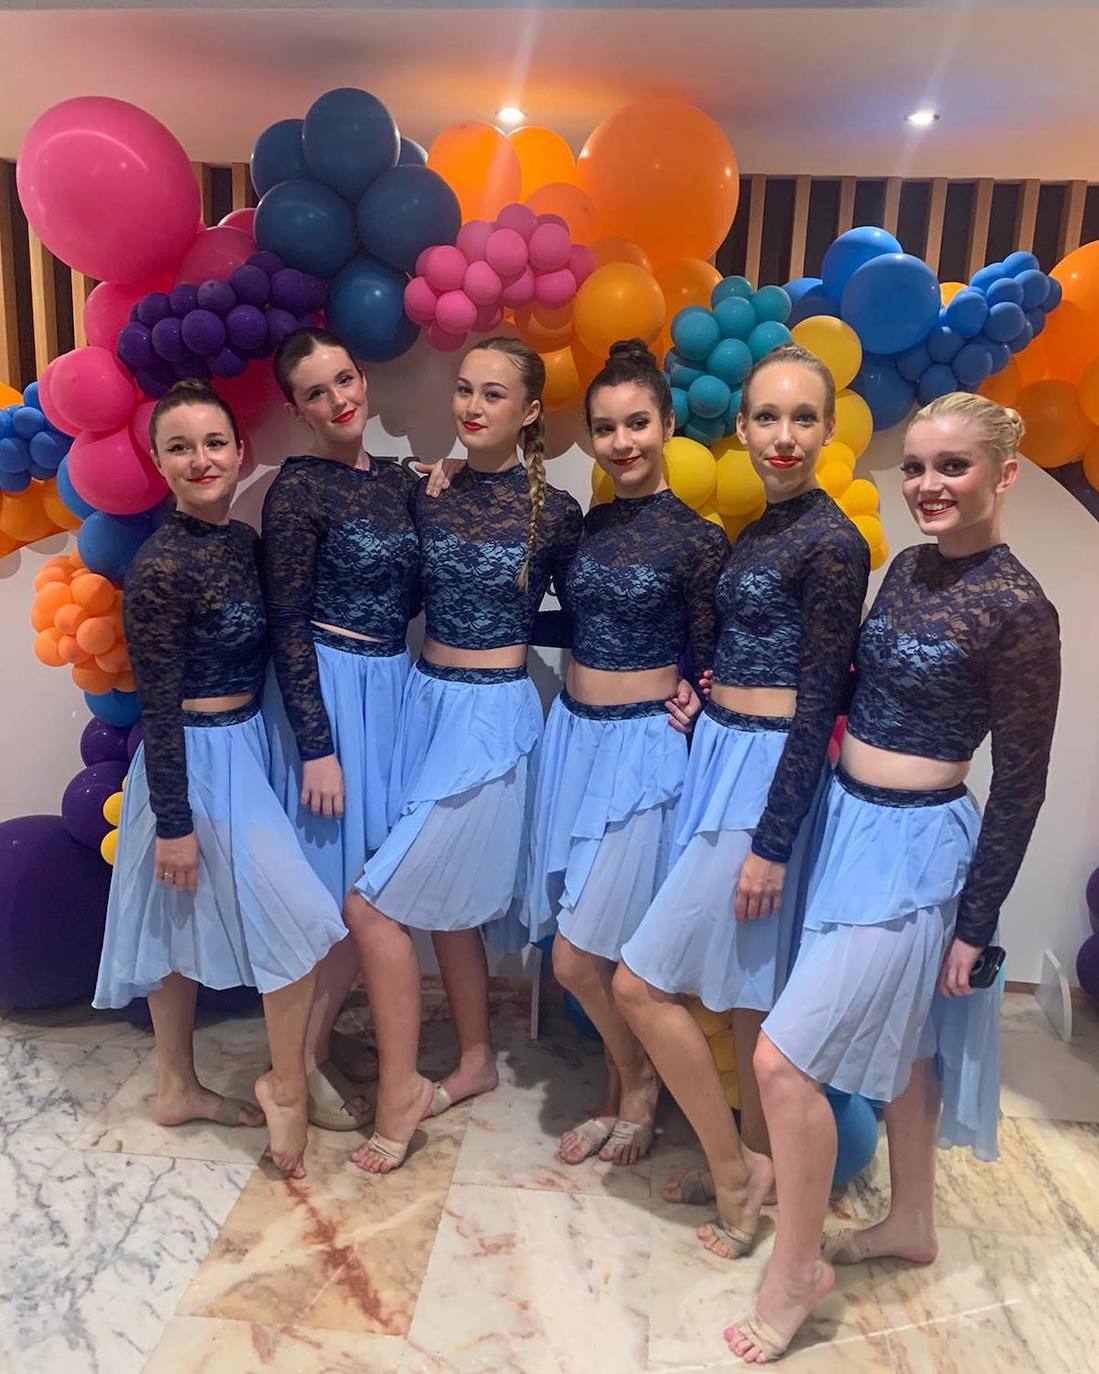 Imagen secundaria 2 - Mijas dance students triumph once more at national championships